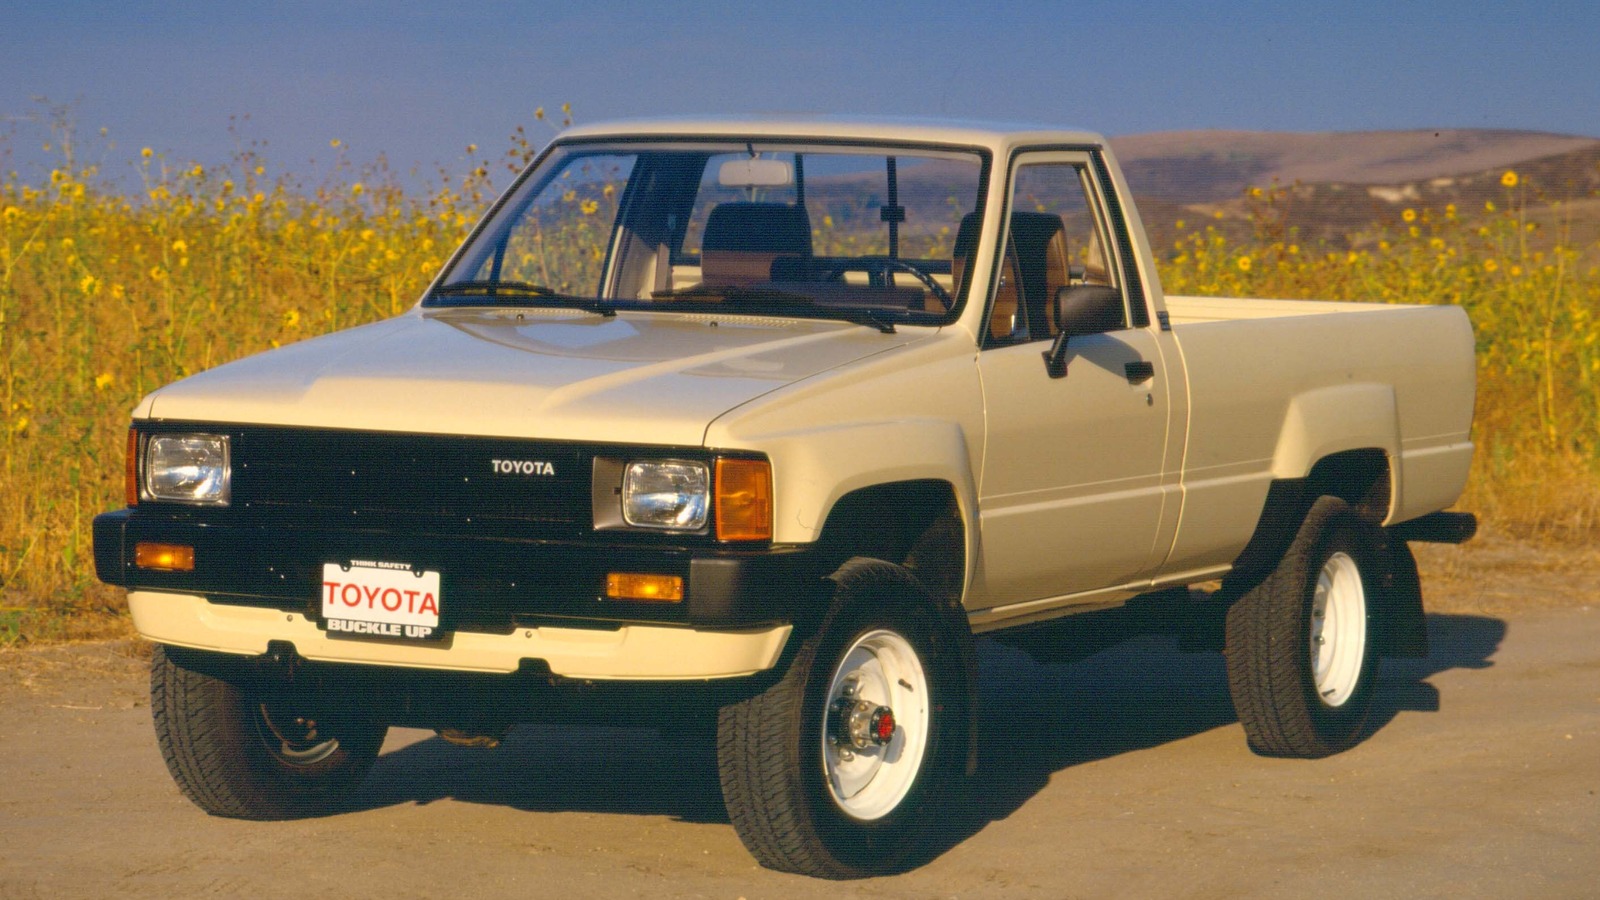 https://www.slashgear.com/img/gallery/is-the-4th-gen-toyota-hilux-really-that-good-or-is-it-just-overhyped/l-intro-1686946814.jpg